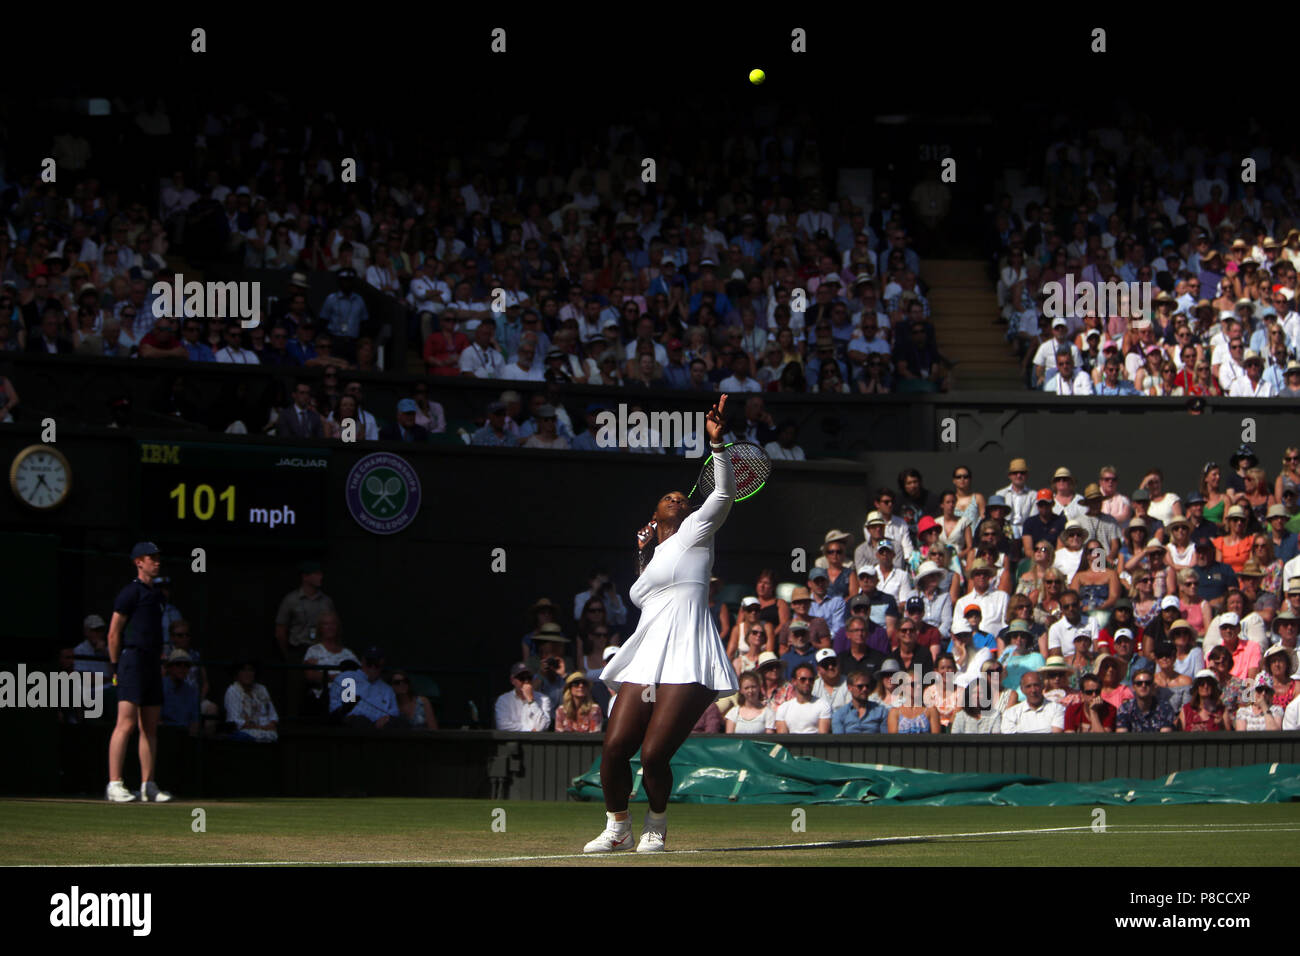 London, UK. 10th July, 2018.  Wimbledon Tennis: Serena Williams serving to Italy's Camila Georgi on Centre Court to advance to the semi-finals at Wimbledon today. Credit: Adam Stoltman/Alamy Live News Stock Photo